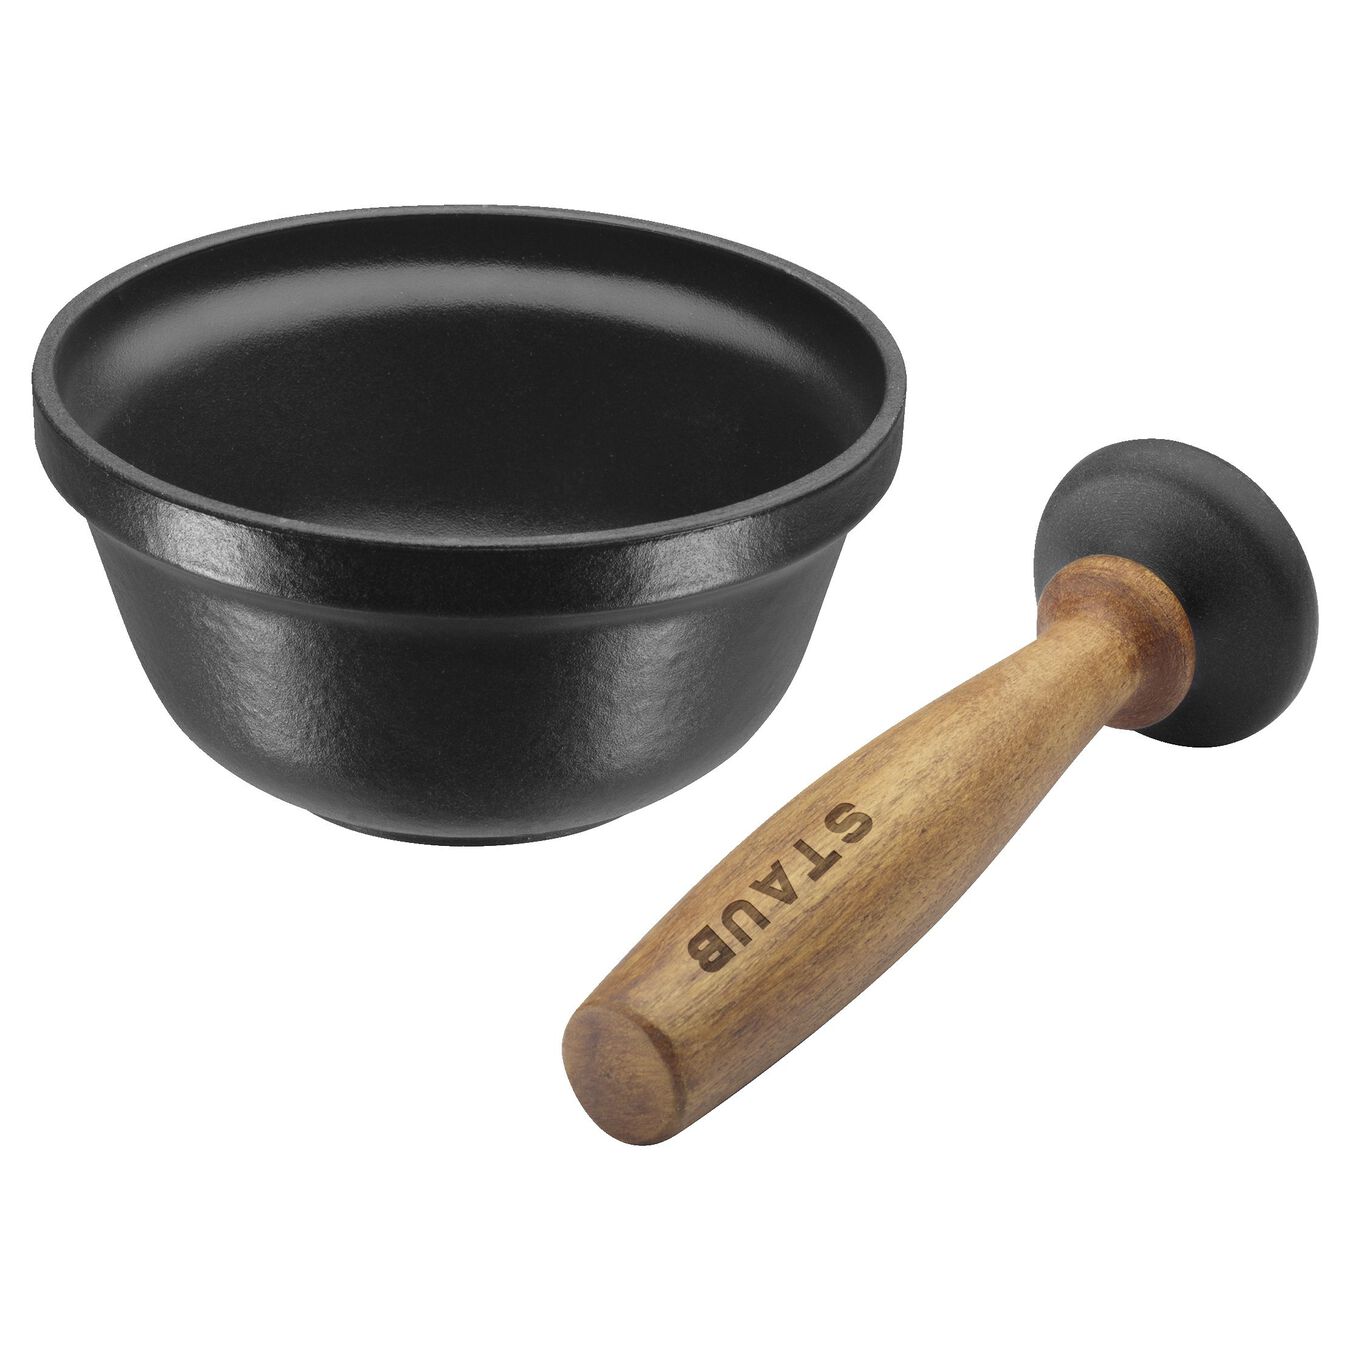 12 cm cast iron Mortar and pestle with pestle, black,,large 1